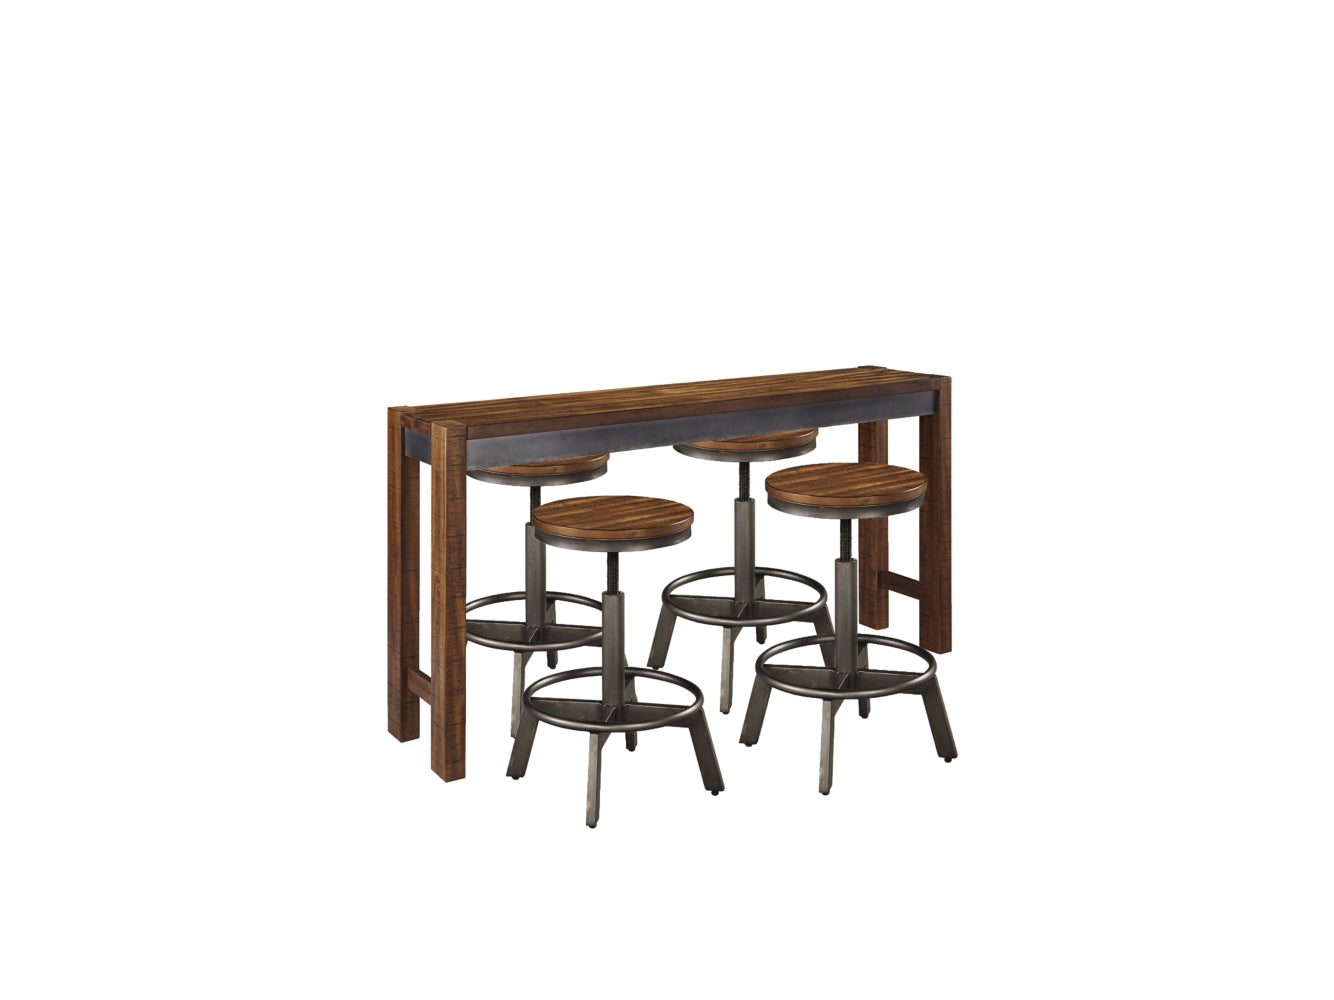 Torjin Counter Height Dining Table and 4 Barstools - PKG000114